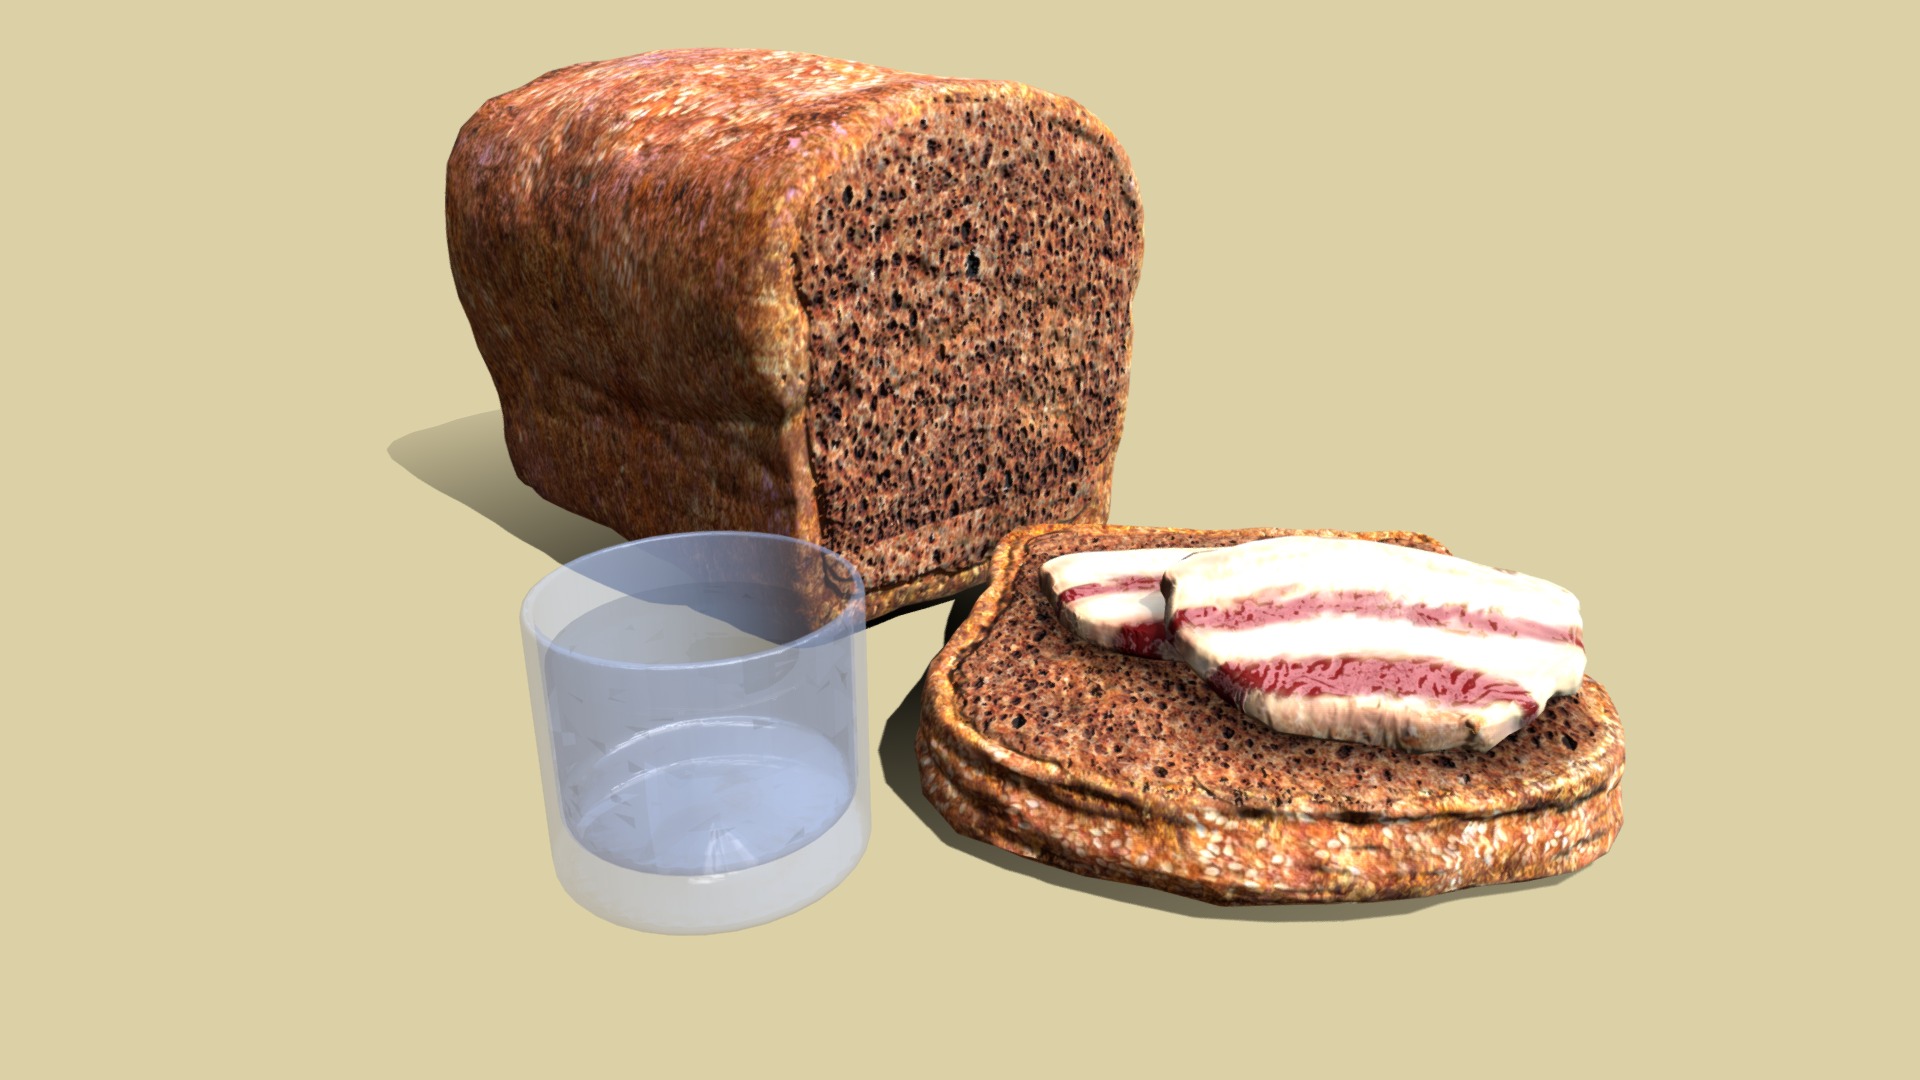 Actually there is a Slavic set: bread, bacon and.....vodka!))))
Download this  for your 3D / AR / VR projects 3d model